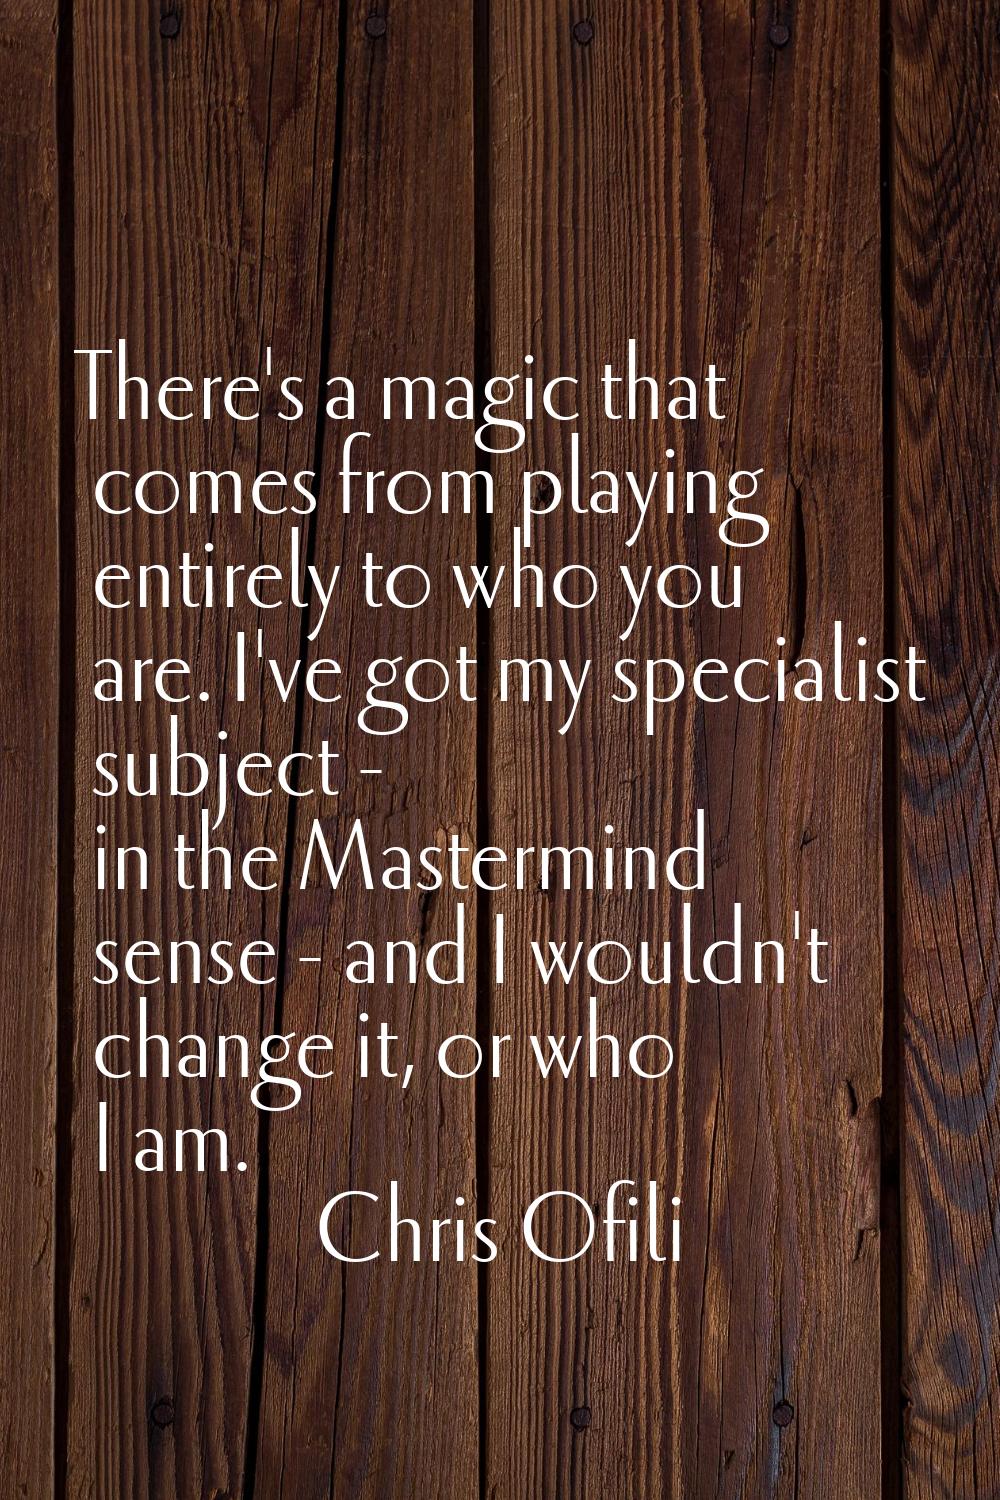 There's a magic that comes from playing entirely to who you are. I've got my specialist subject - i